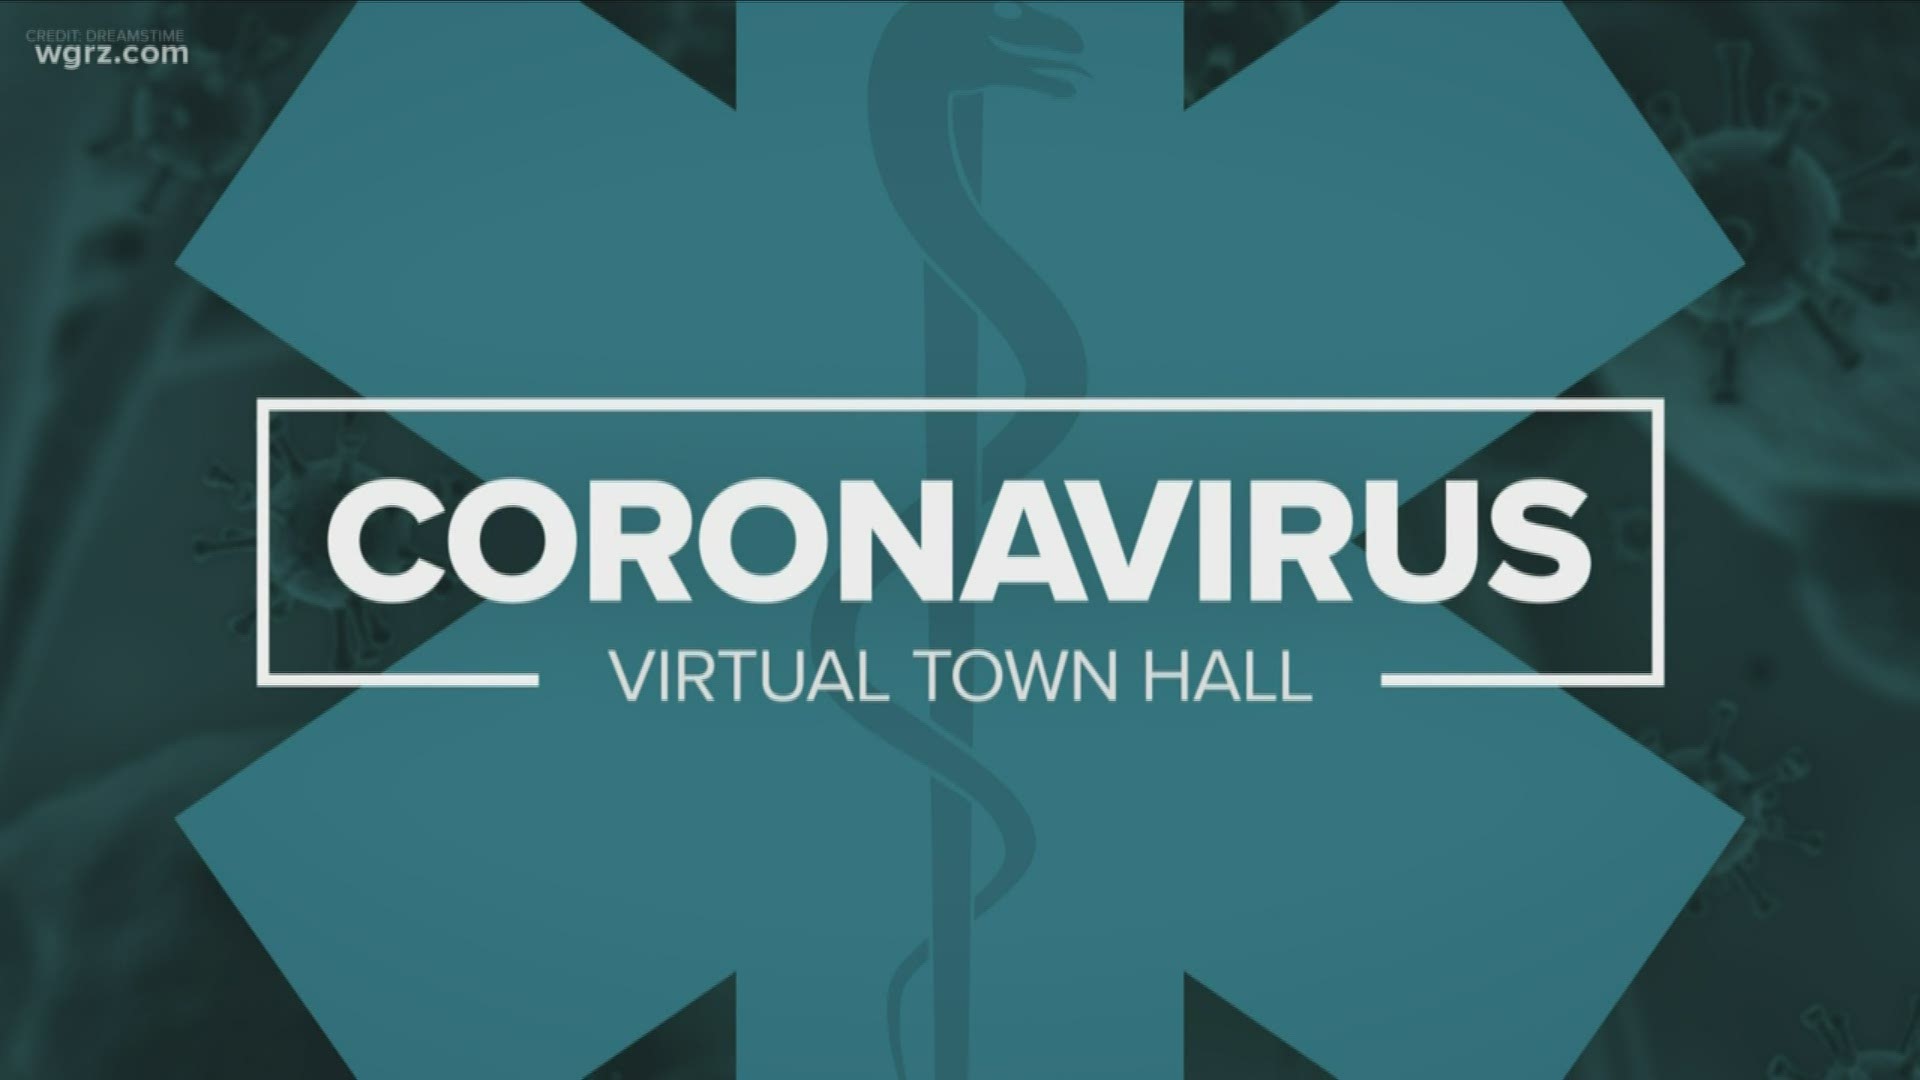 Here from our team in our Virtual Town Hall